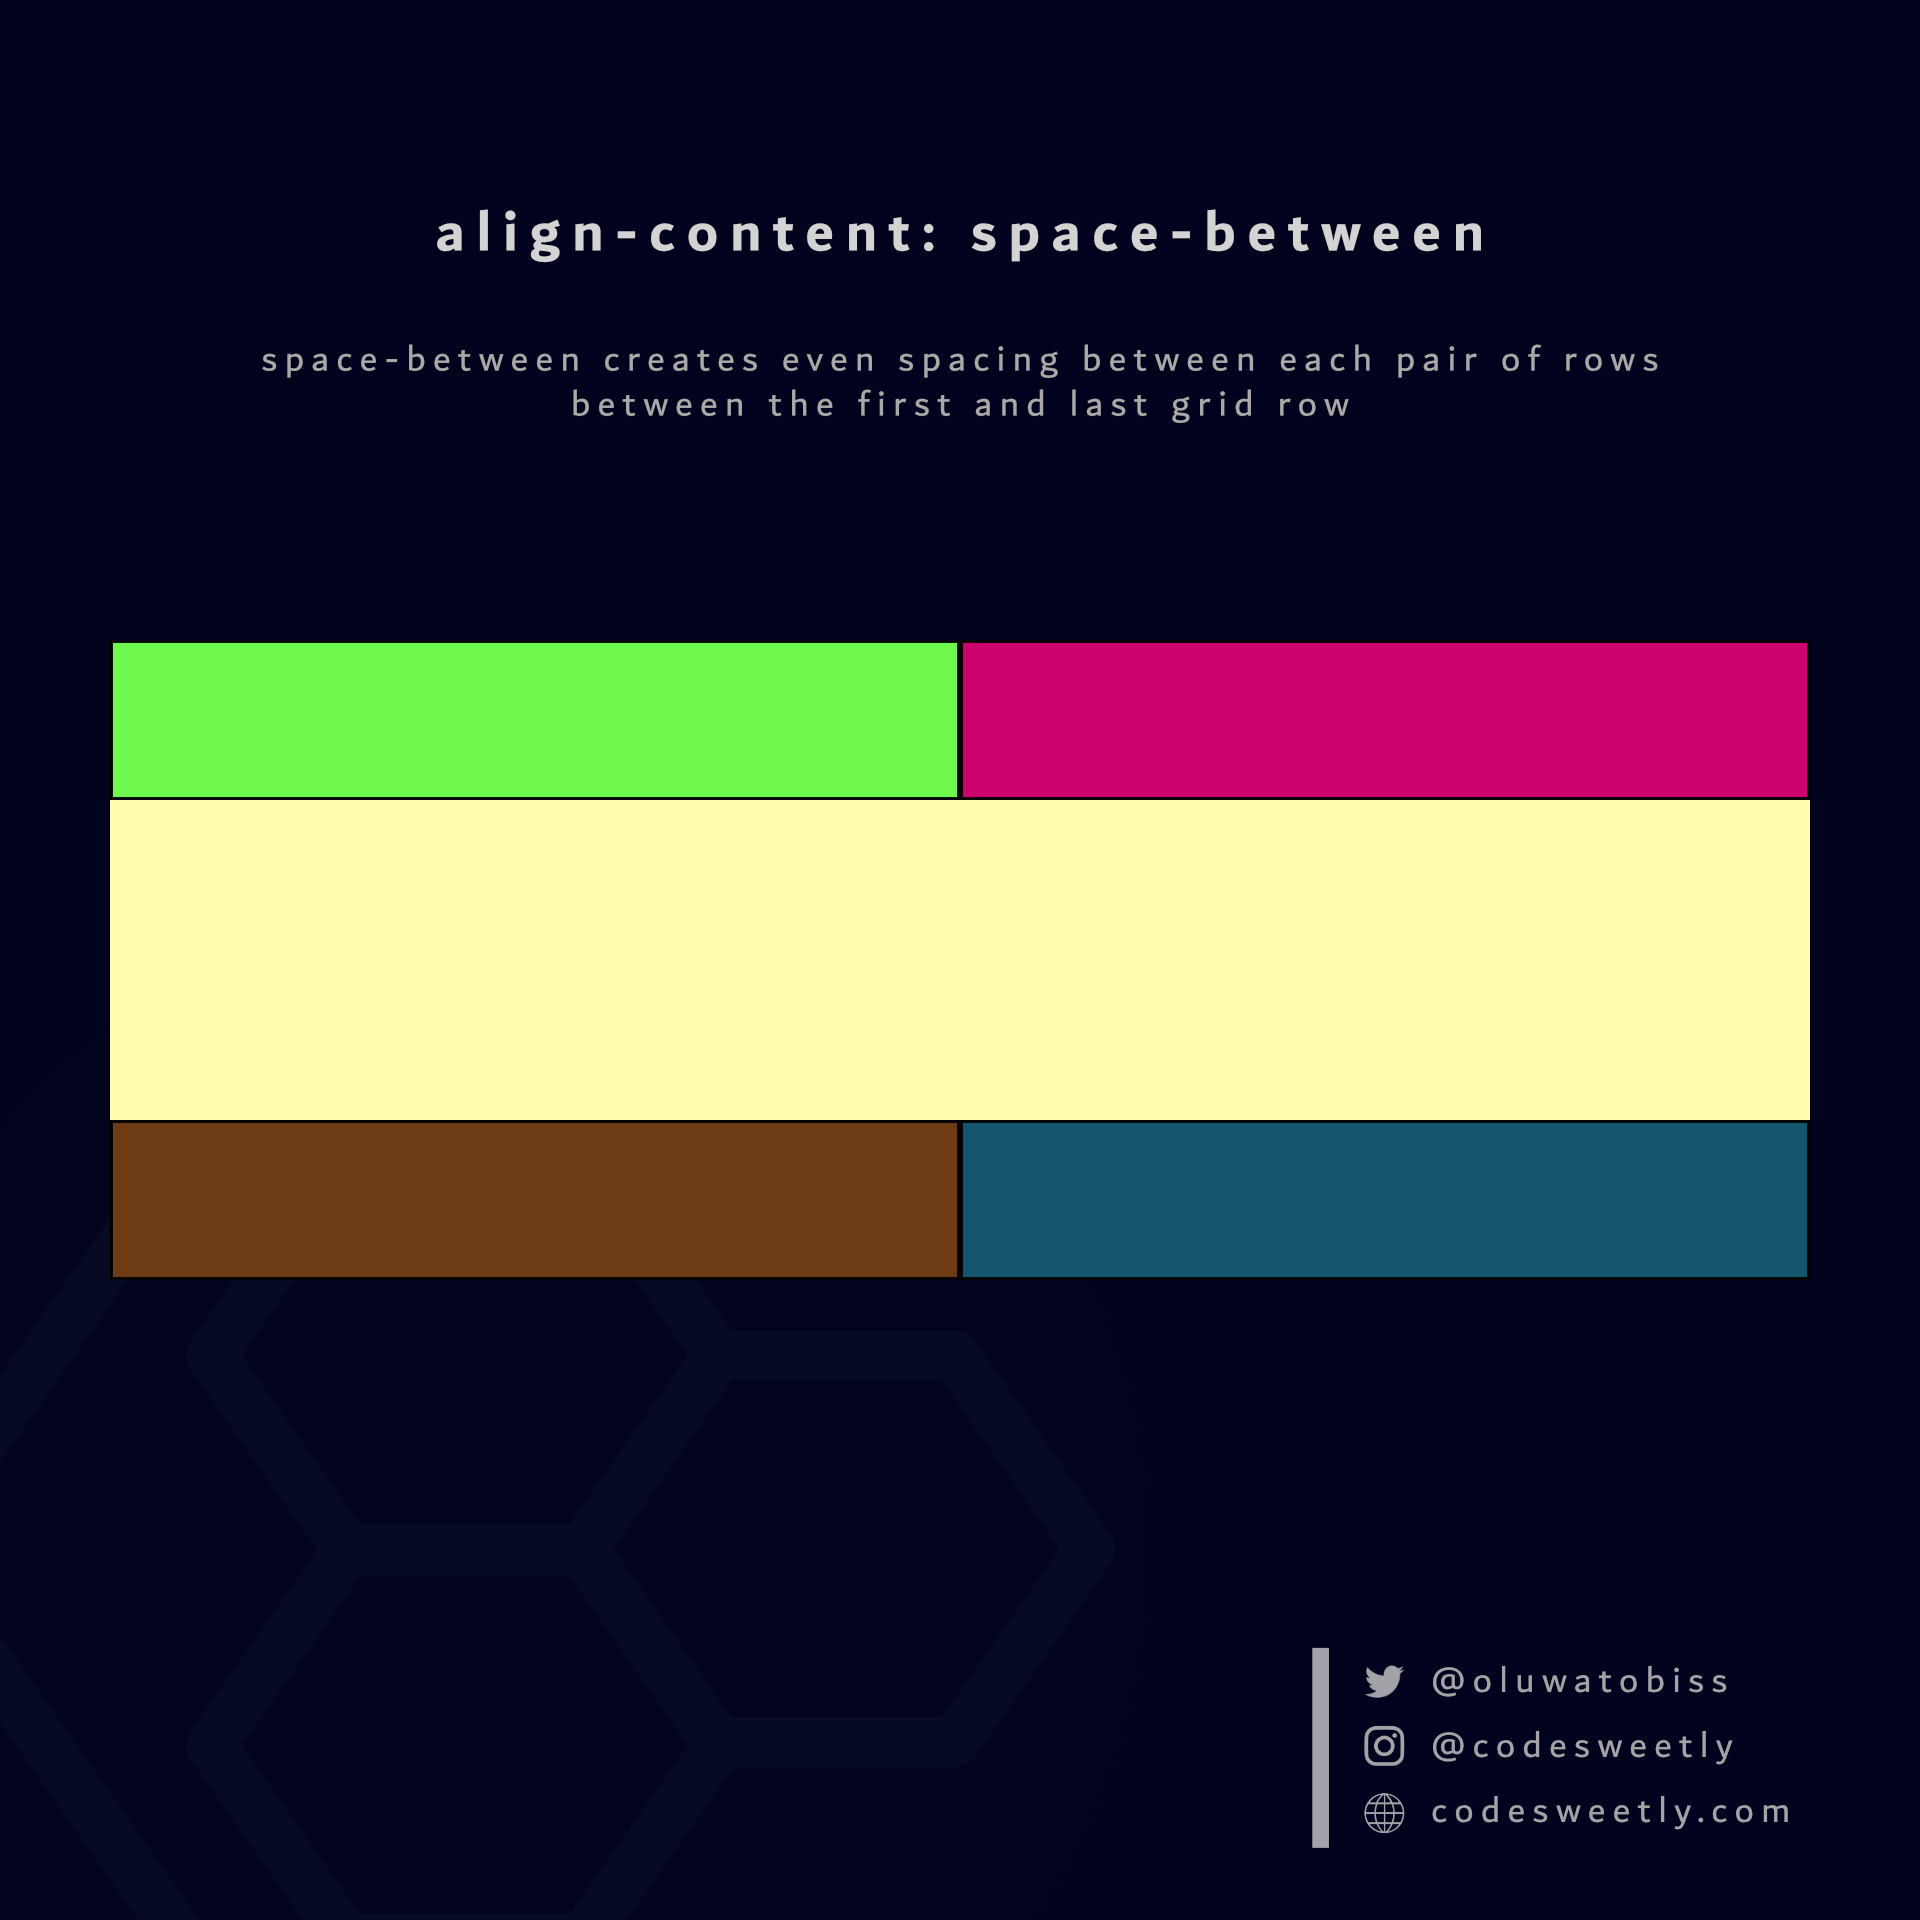 Illustration of align-content's space-between value in CSS Grid